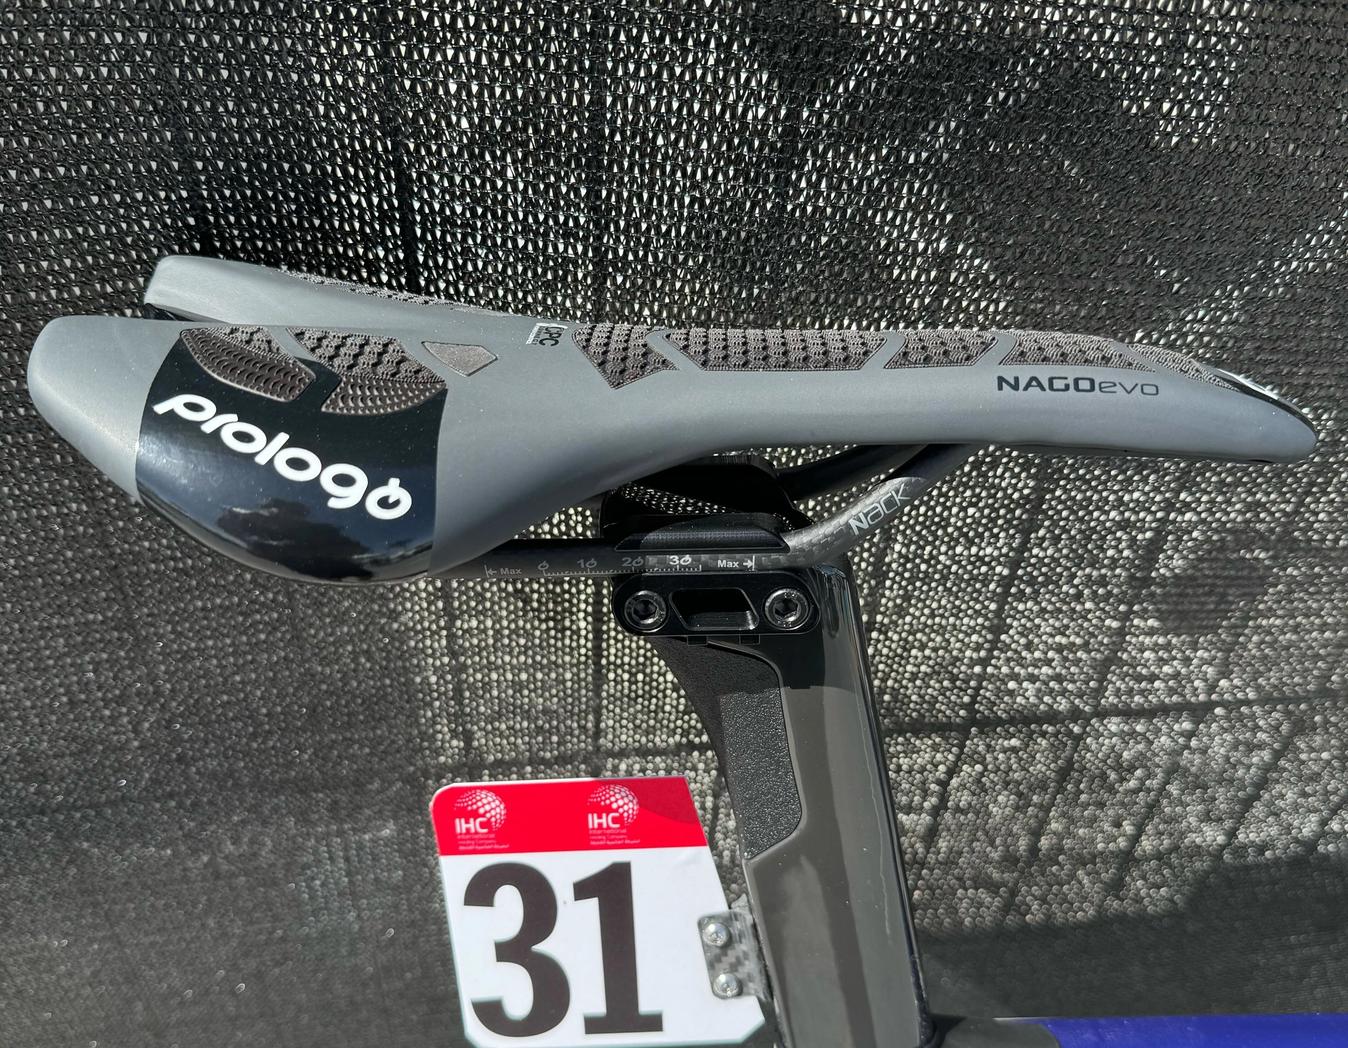 The Prologo Nago CPC saddle has small rubberised sections to help with grip and rider stability